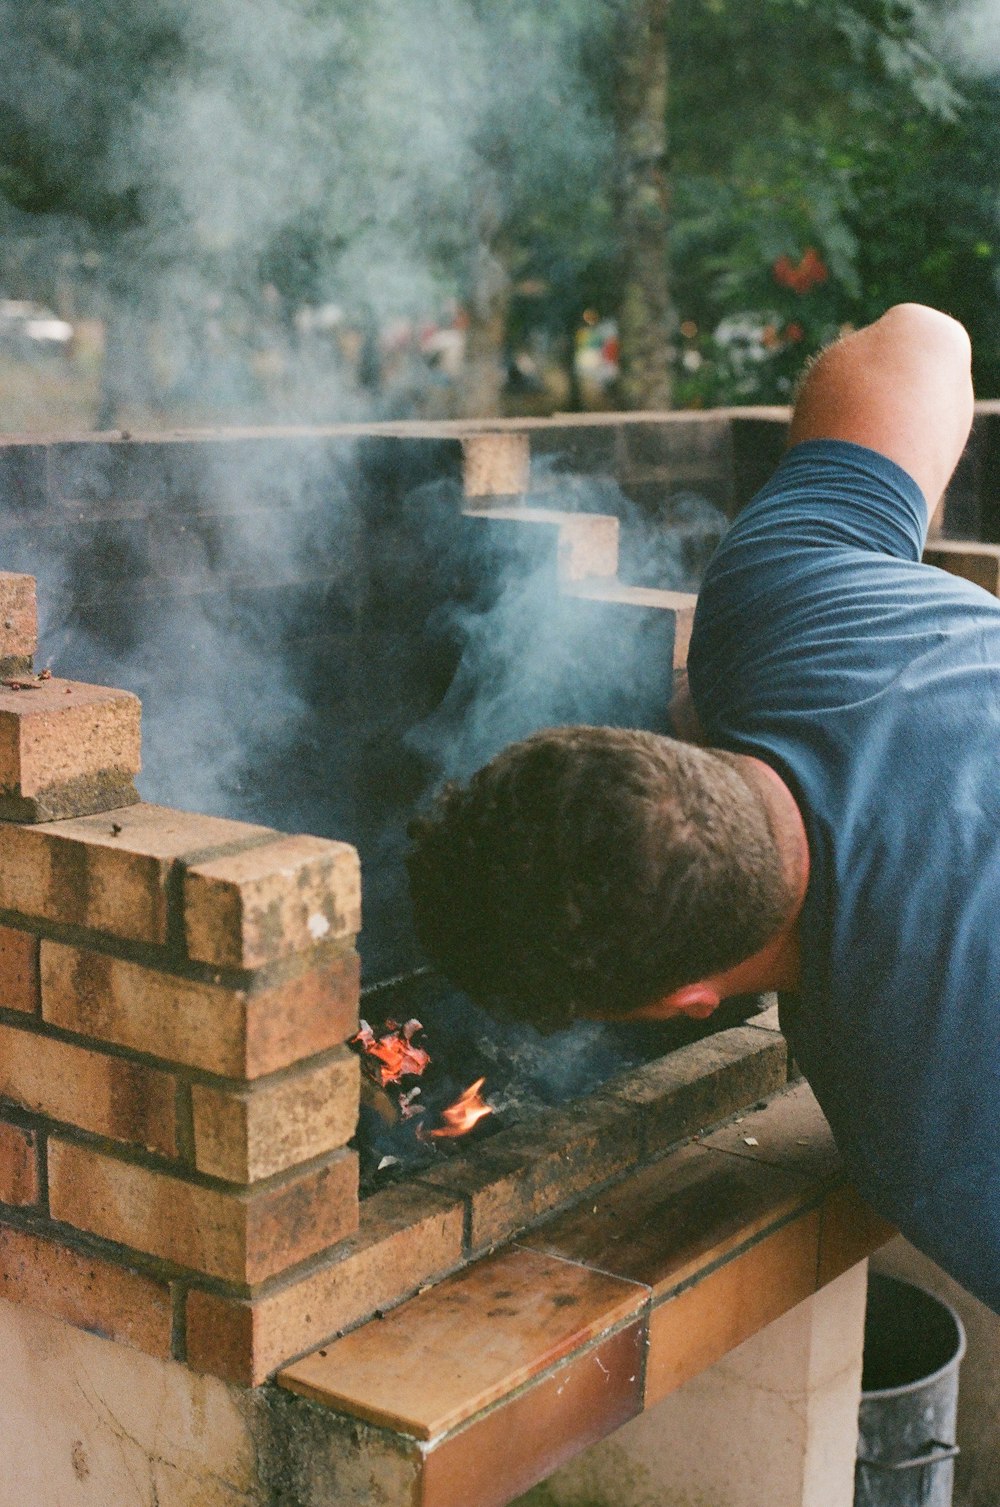 a man is cooking on a brick grill